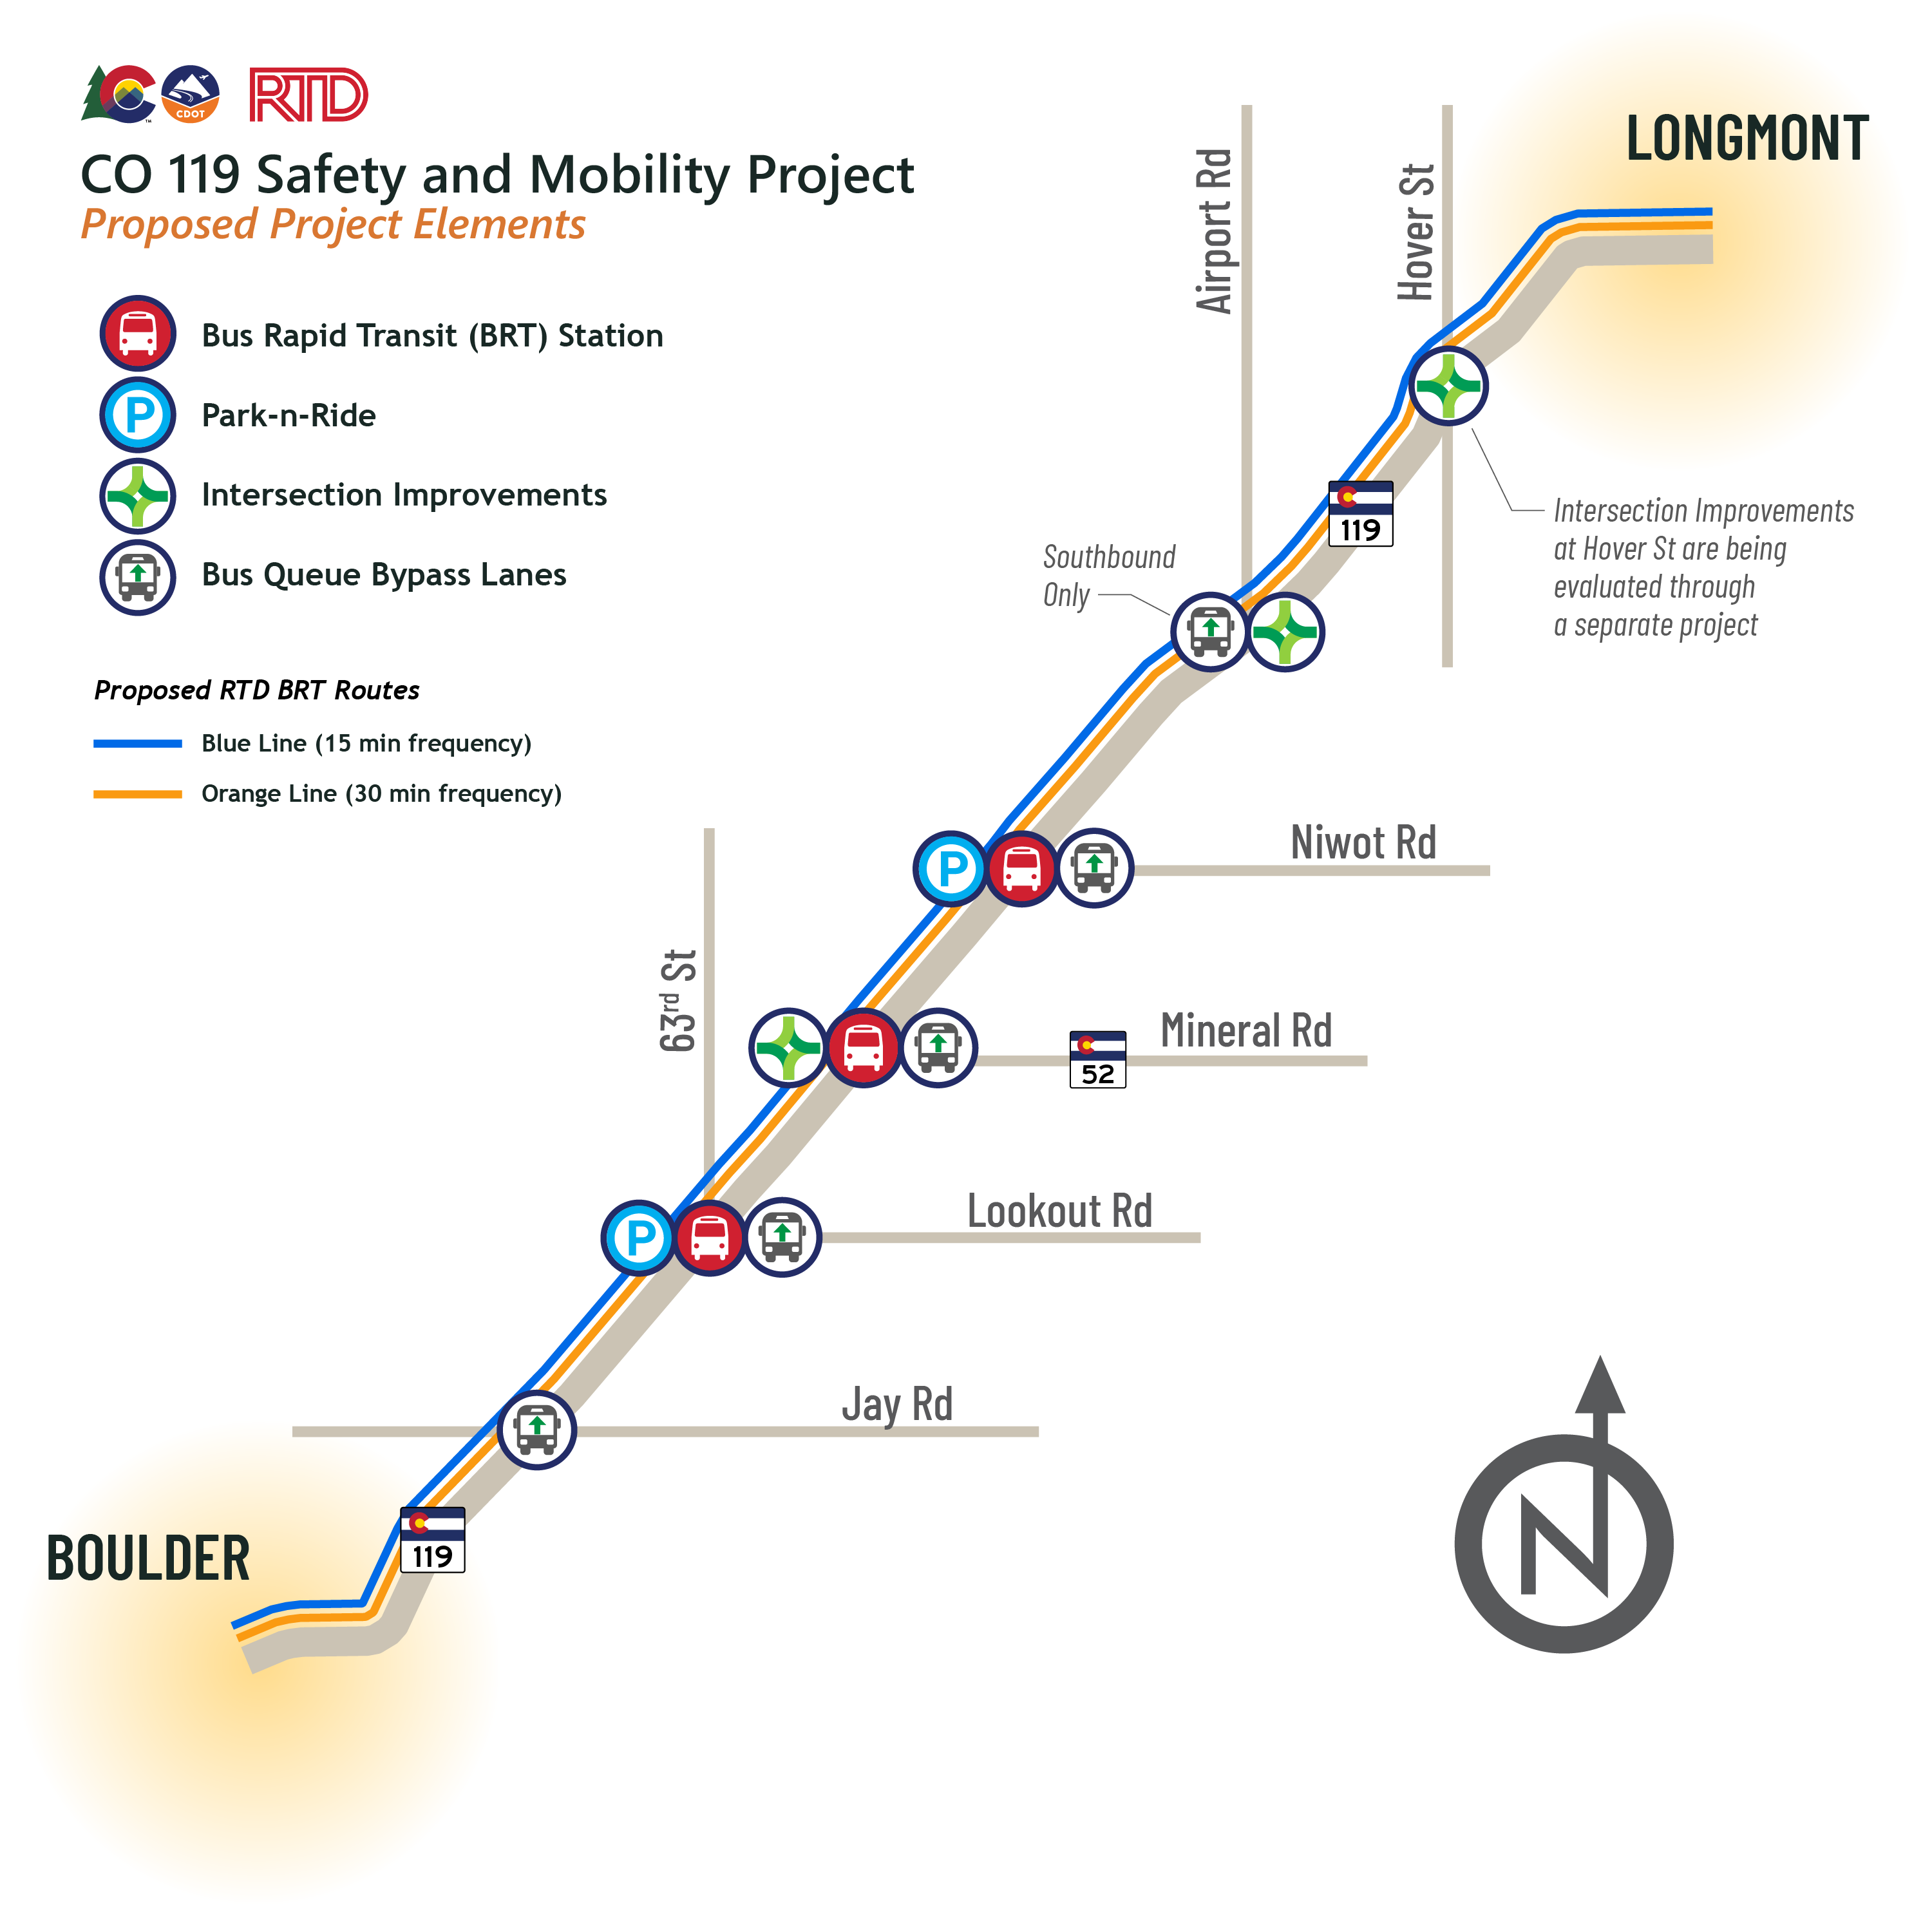 CO 119 Safety and Mobility Project Map (1).png detail image